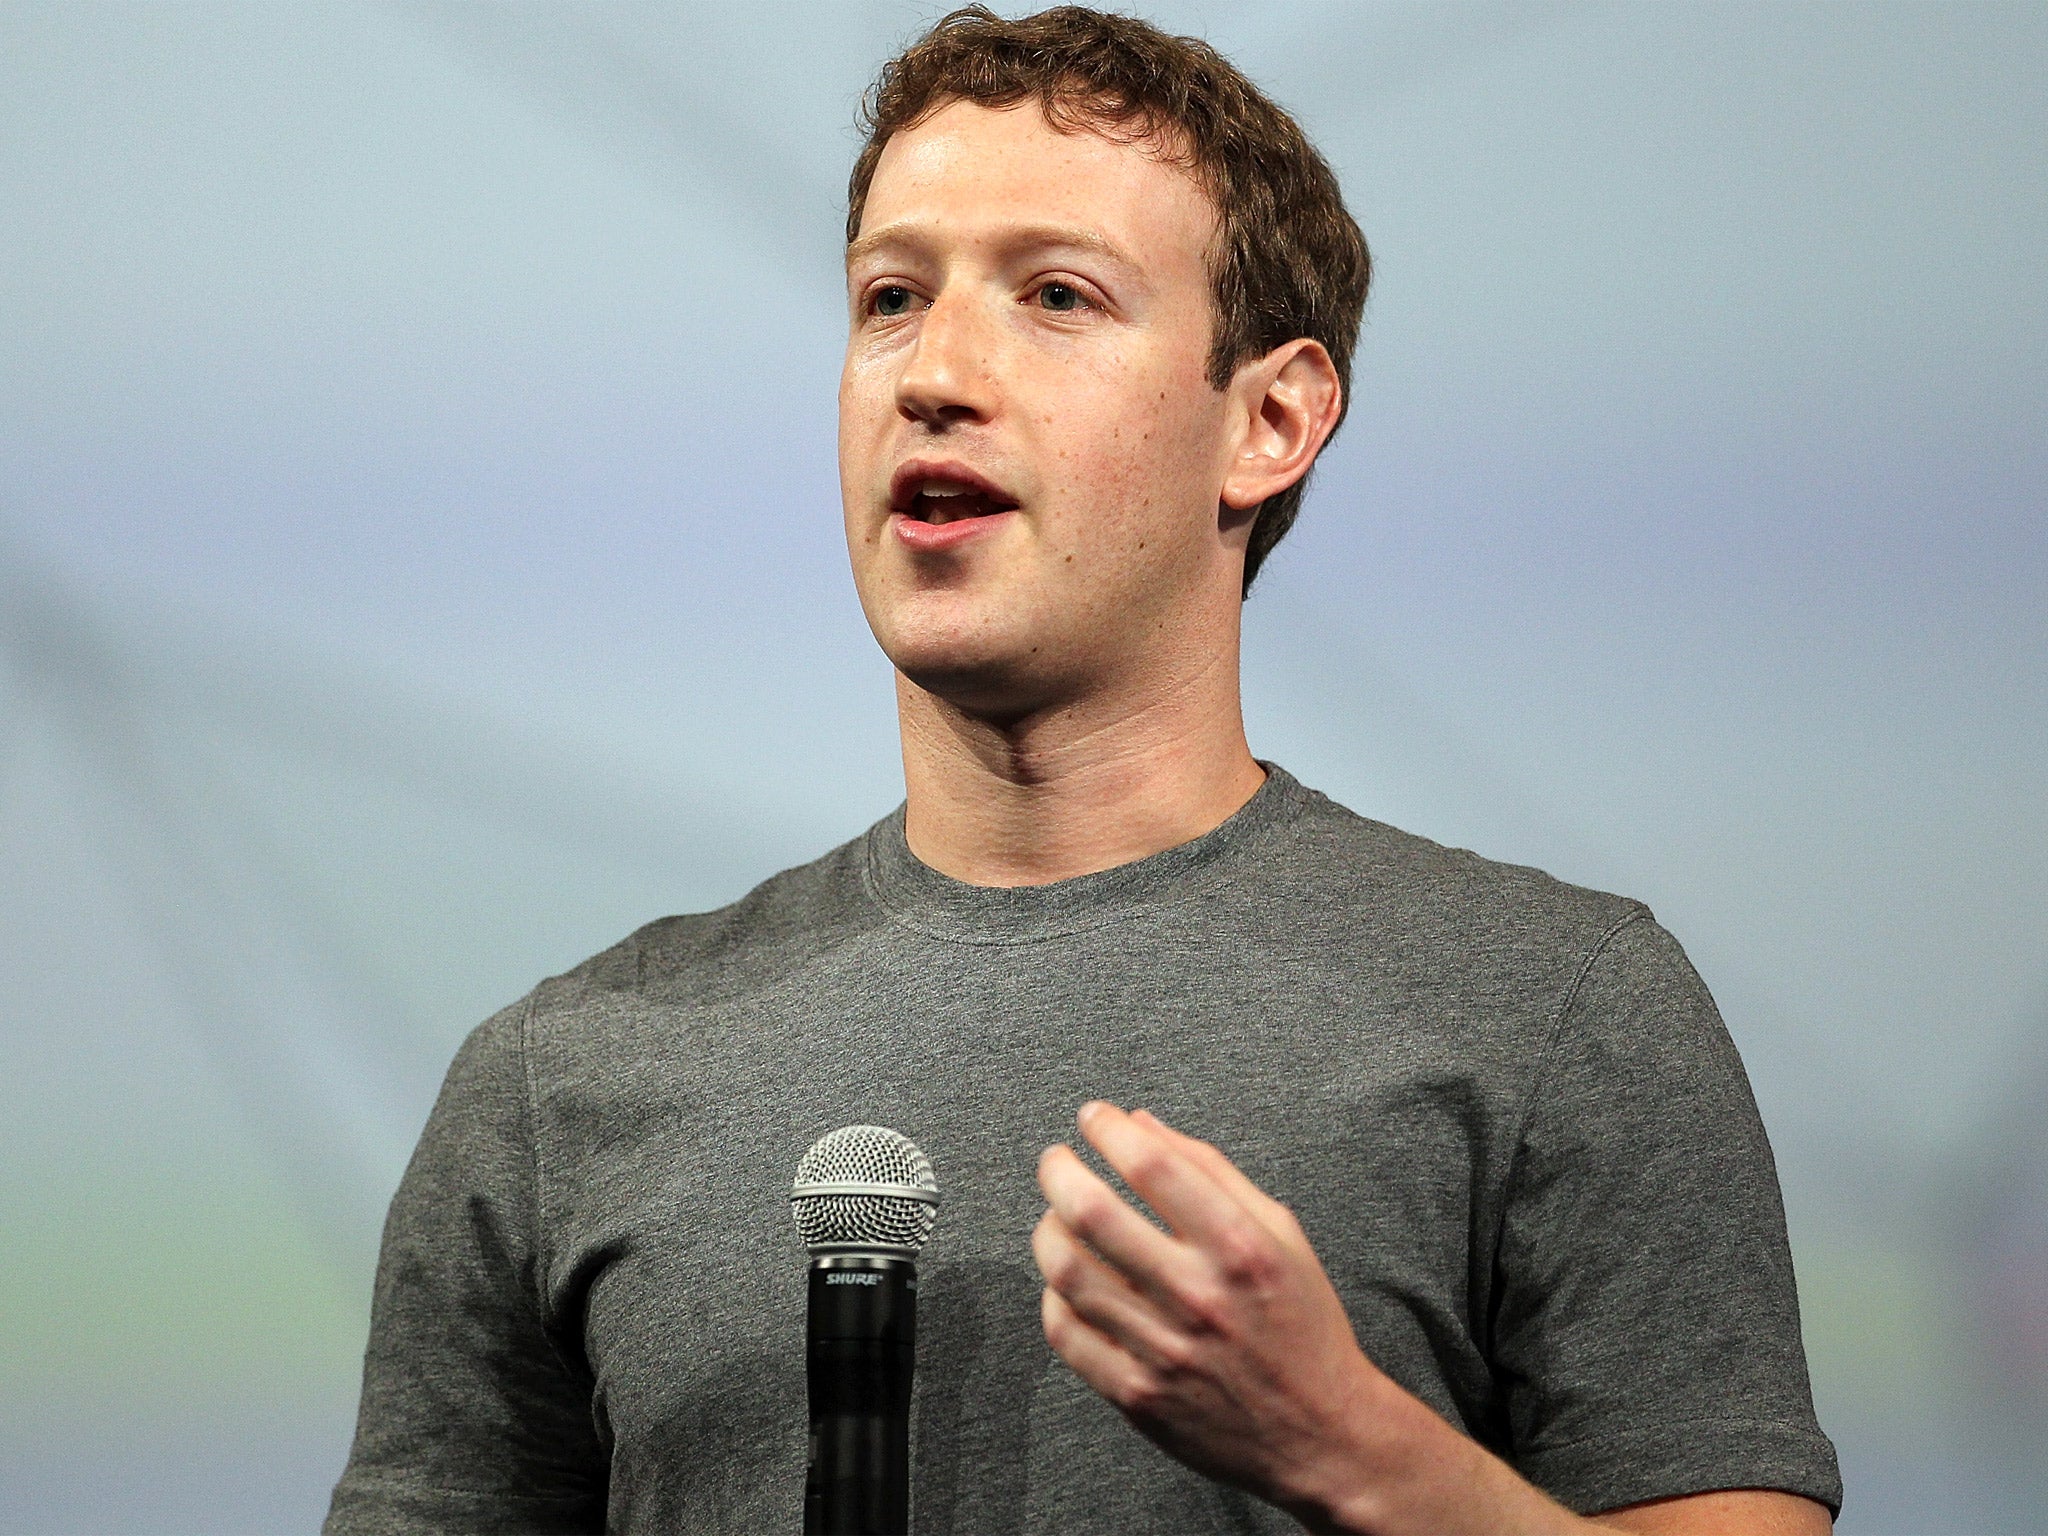 Zuckerberg's $33.4b fortune saw him enter the top 20 billionaires for the first time